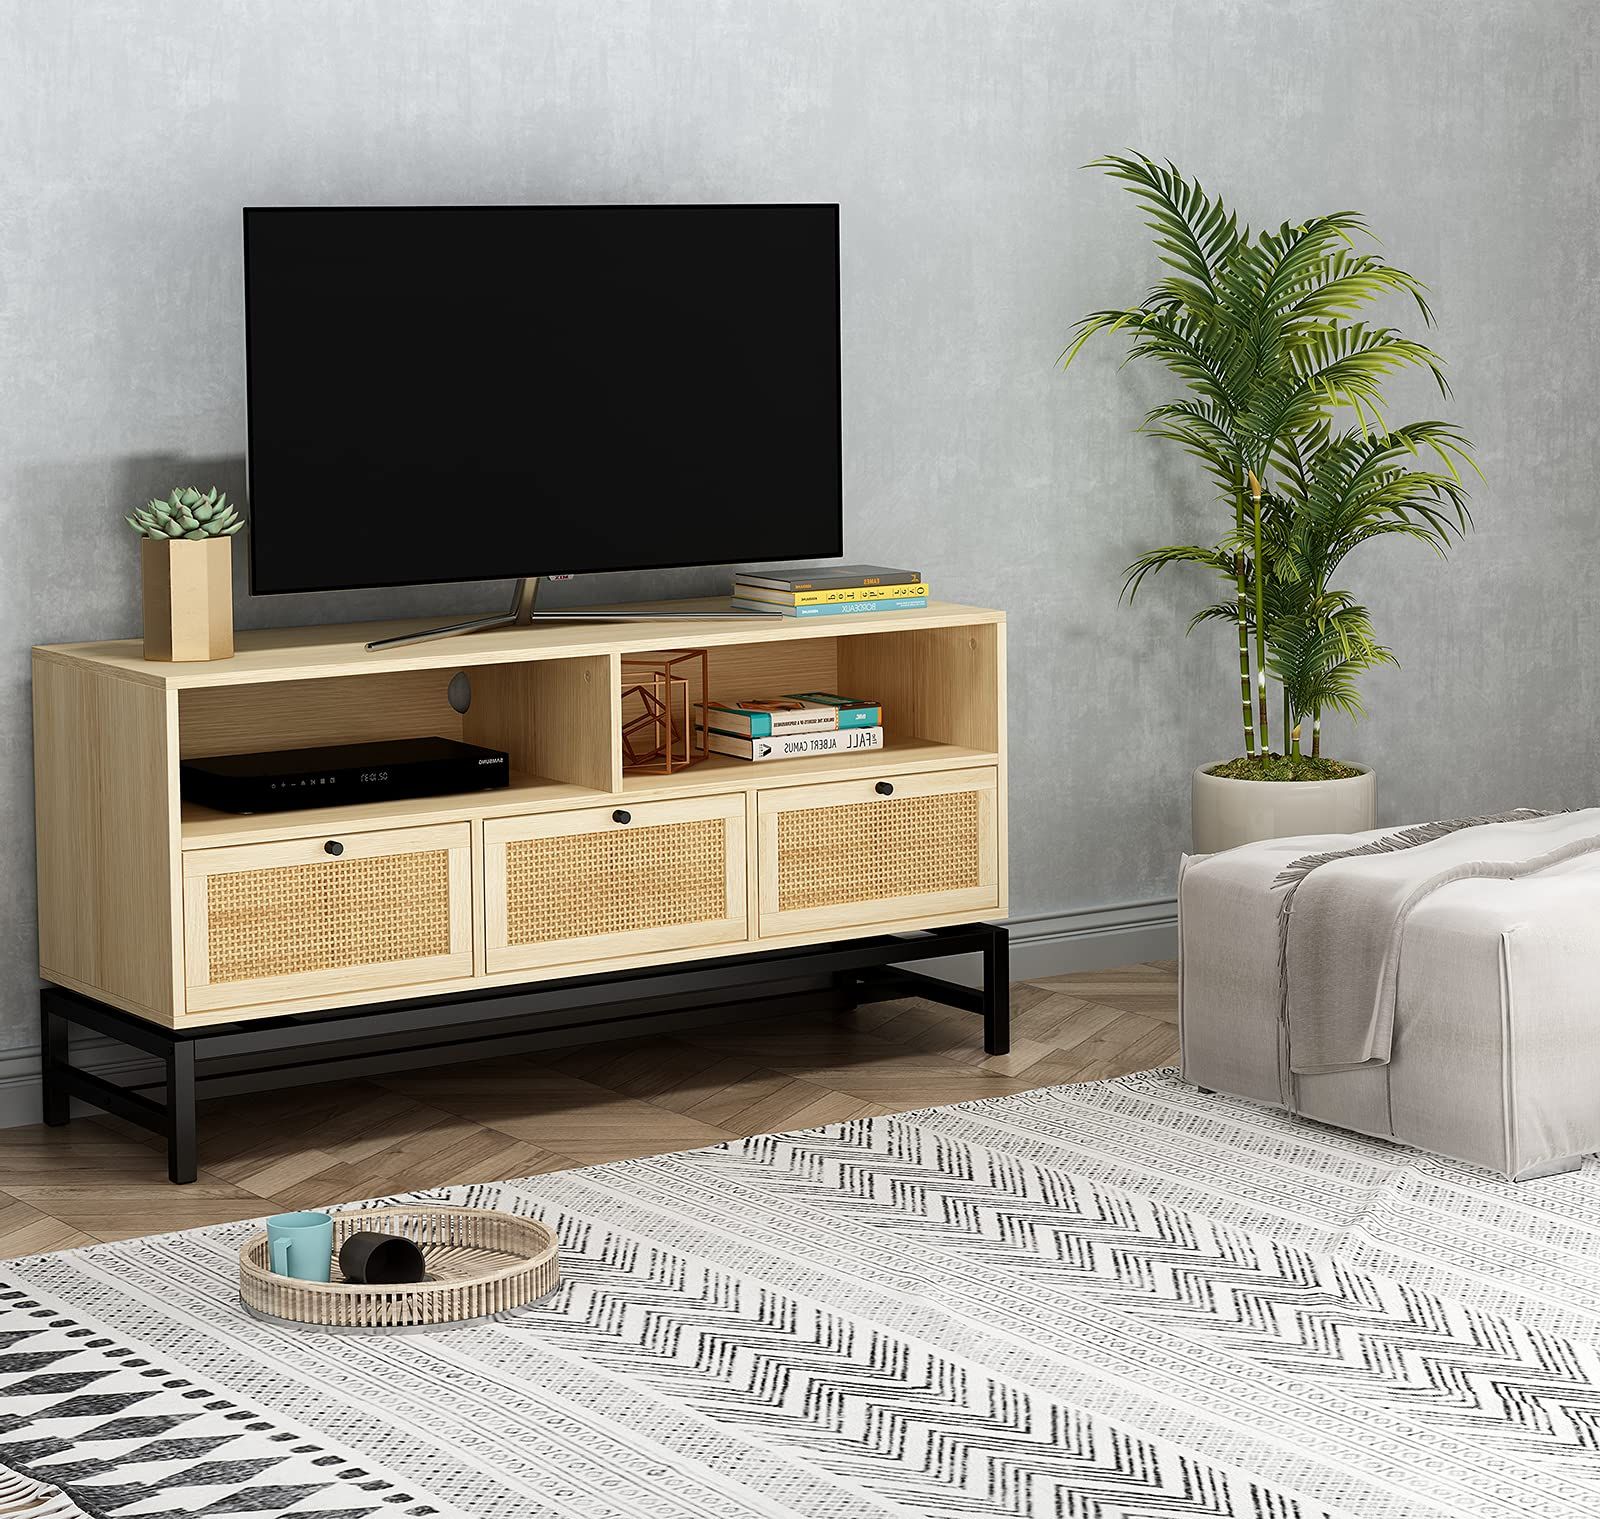 Buy Rattan Tv Stand Farmhouse Tv Cabinet Suitable For Tvs Up To 50 Throughout Recent Farmhouse Rattan Tv Stands (View 6 of 15)